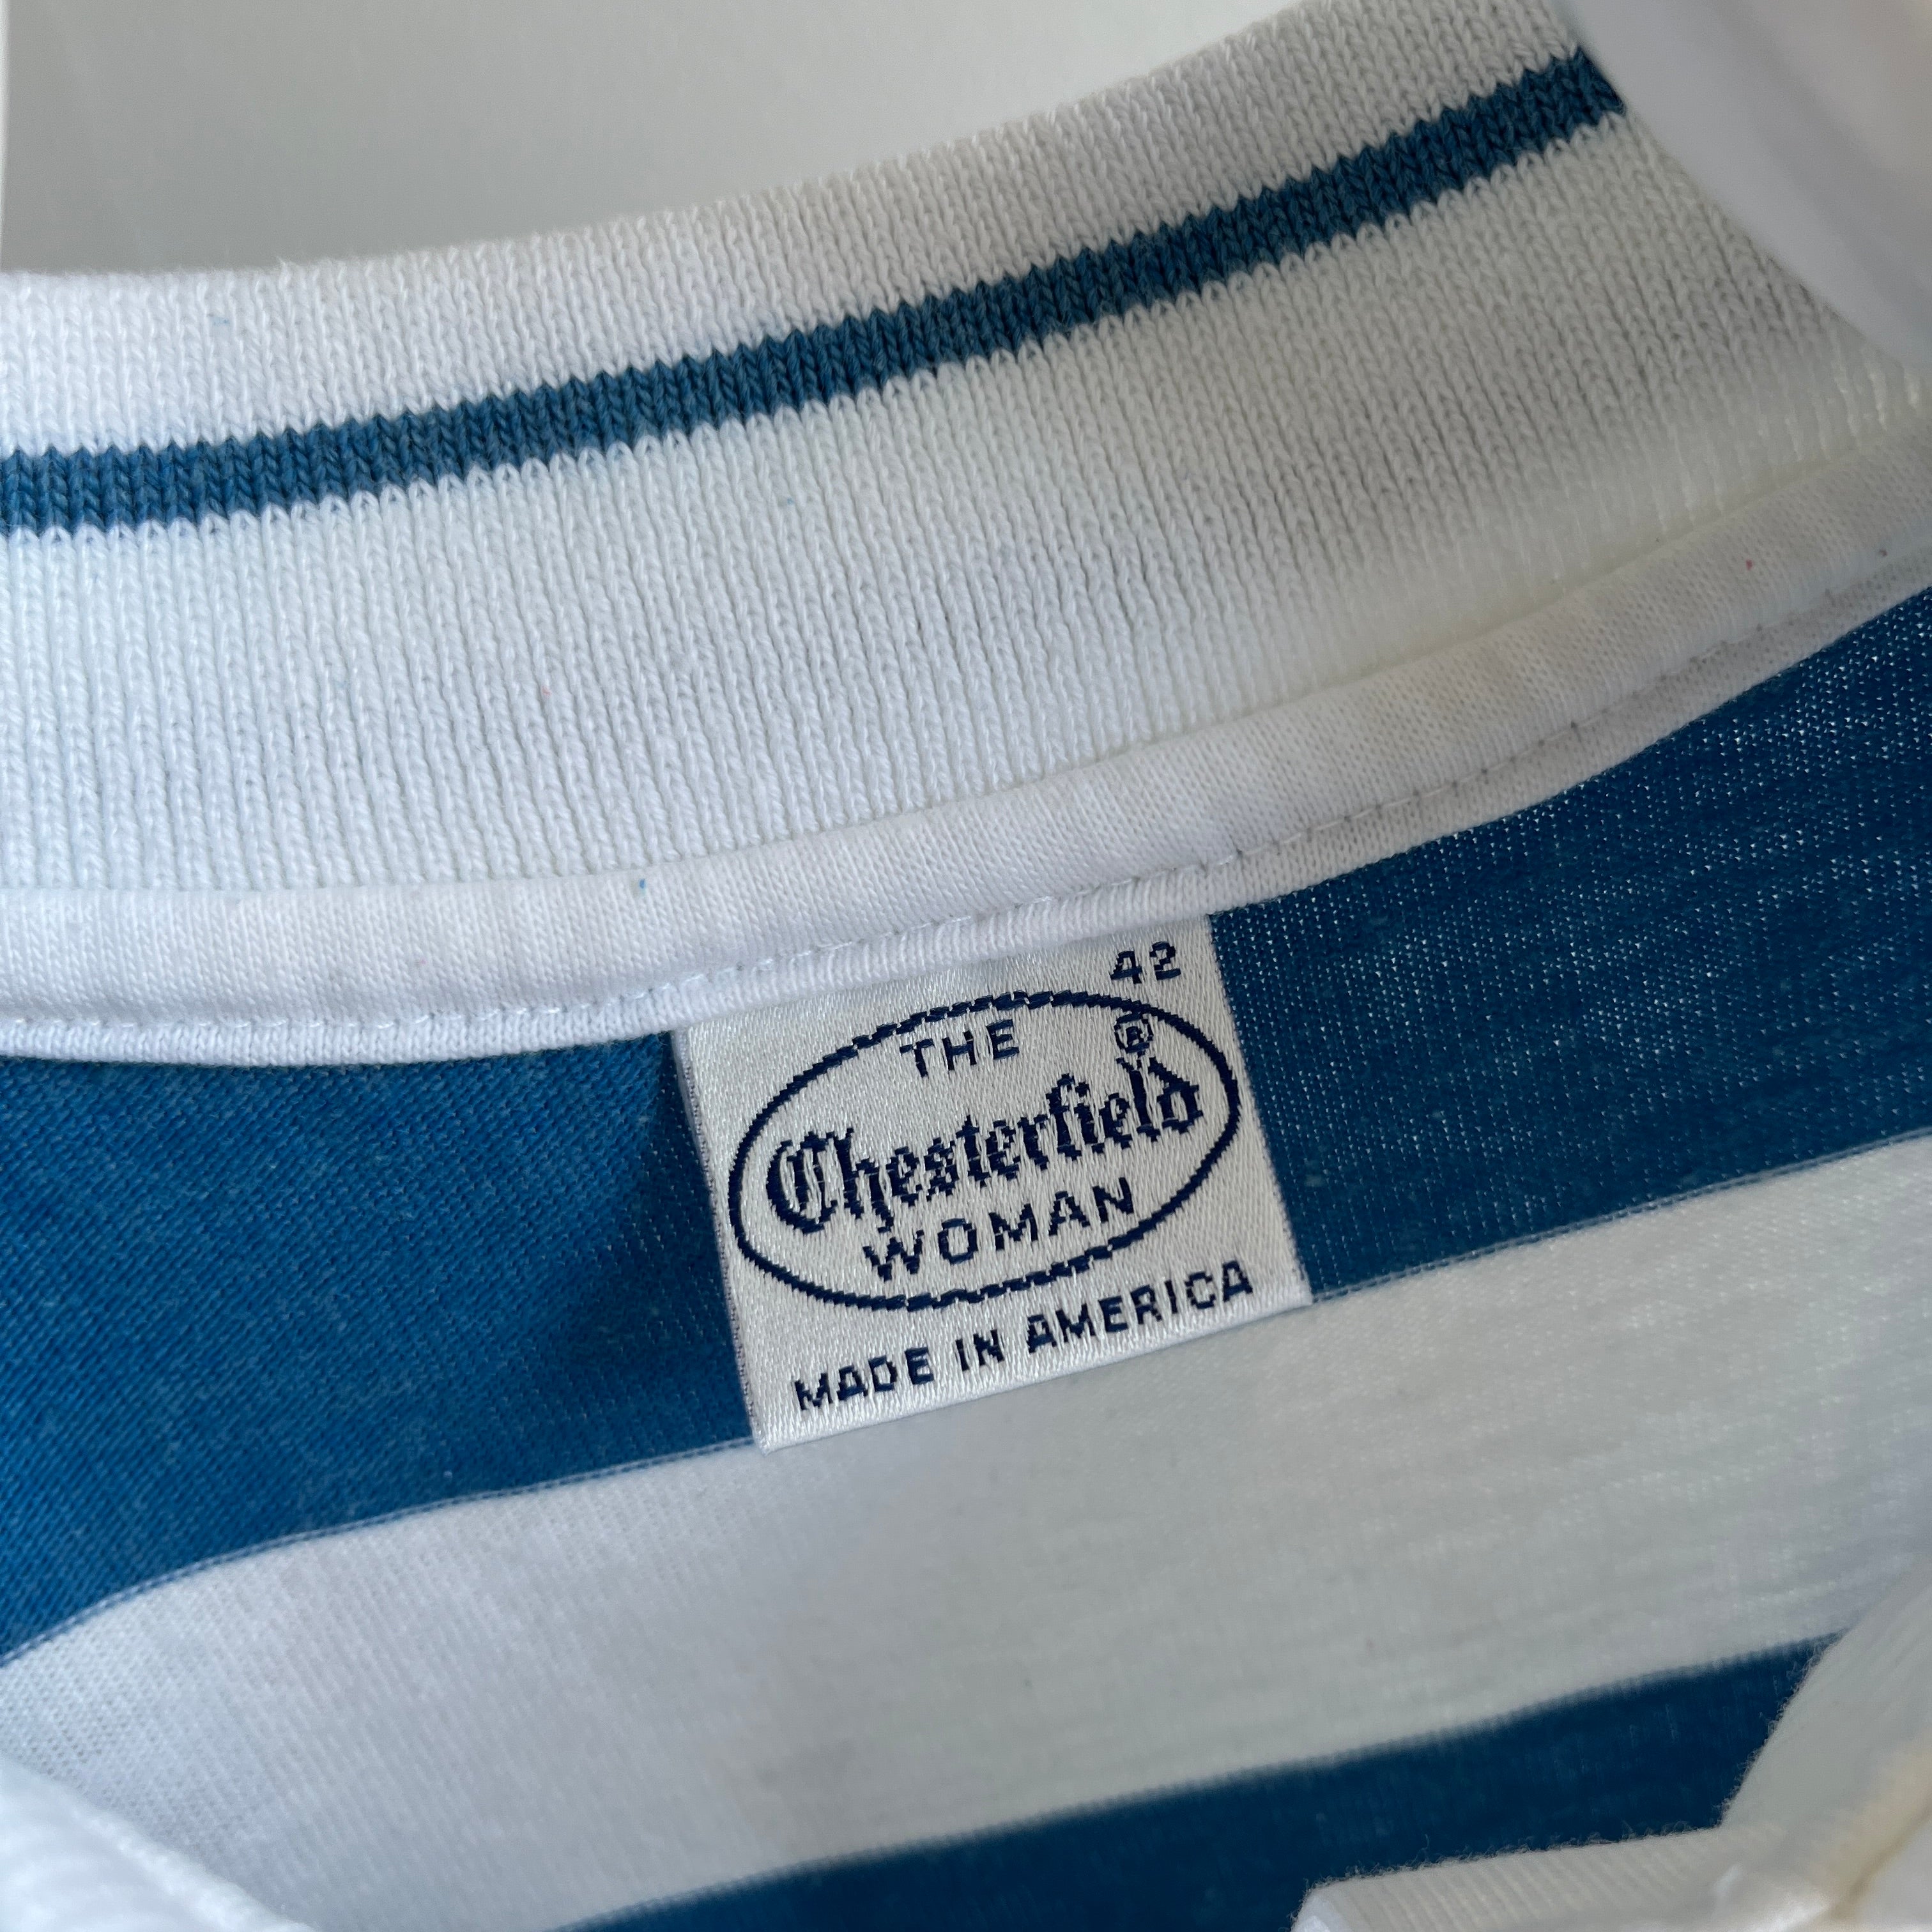 1980s Slouchy and Boxy Blue and White Polo Shirt